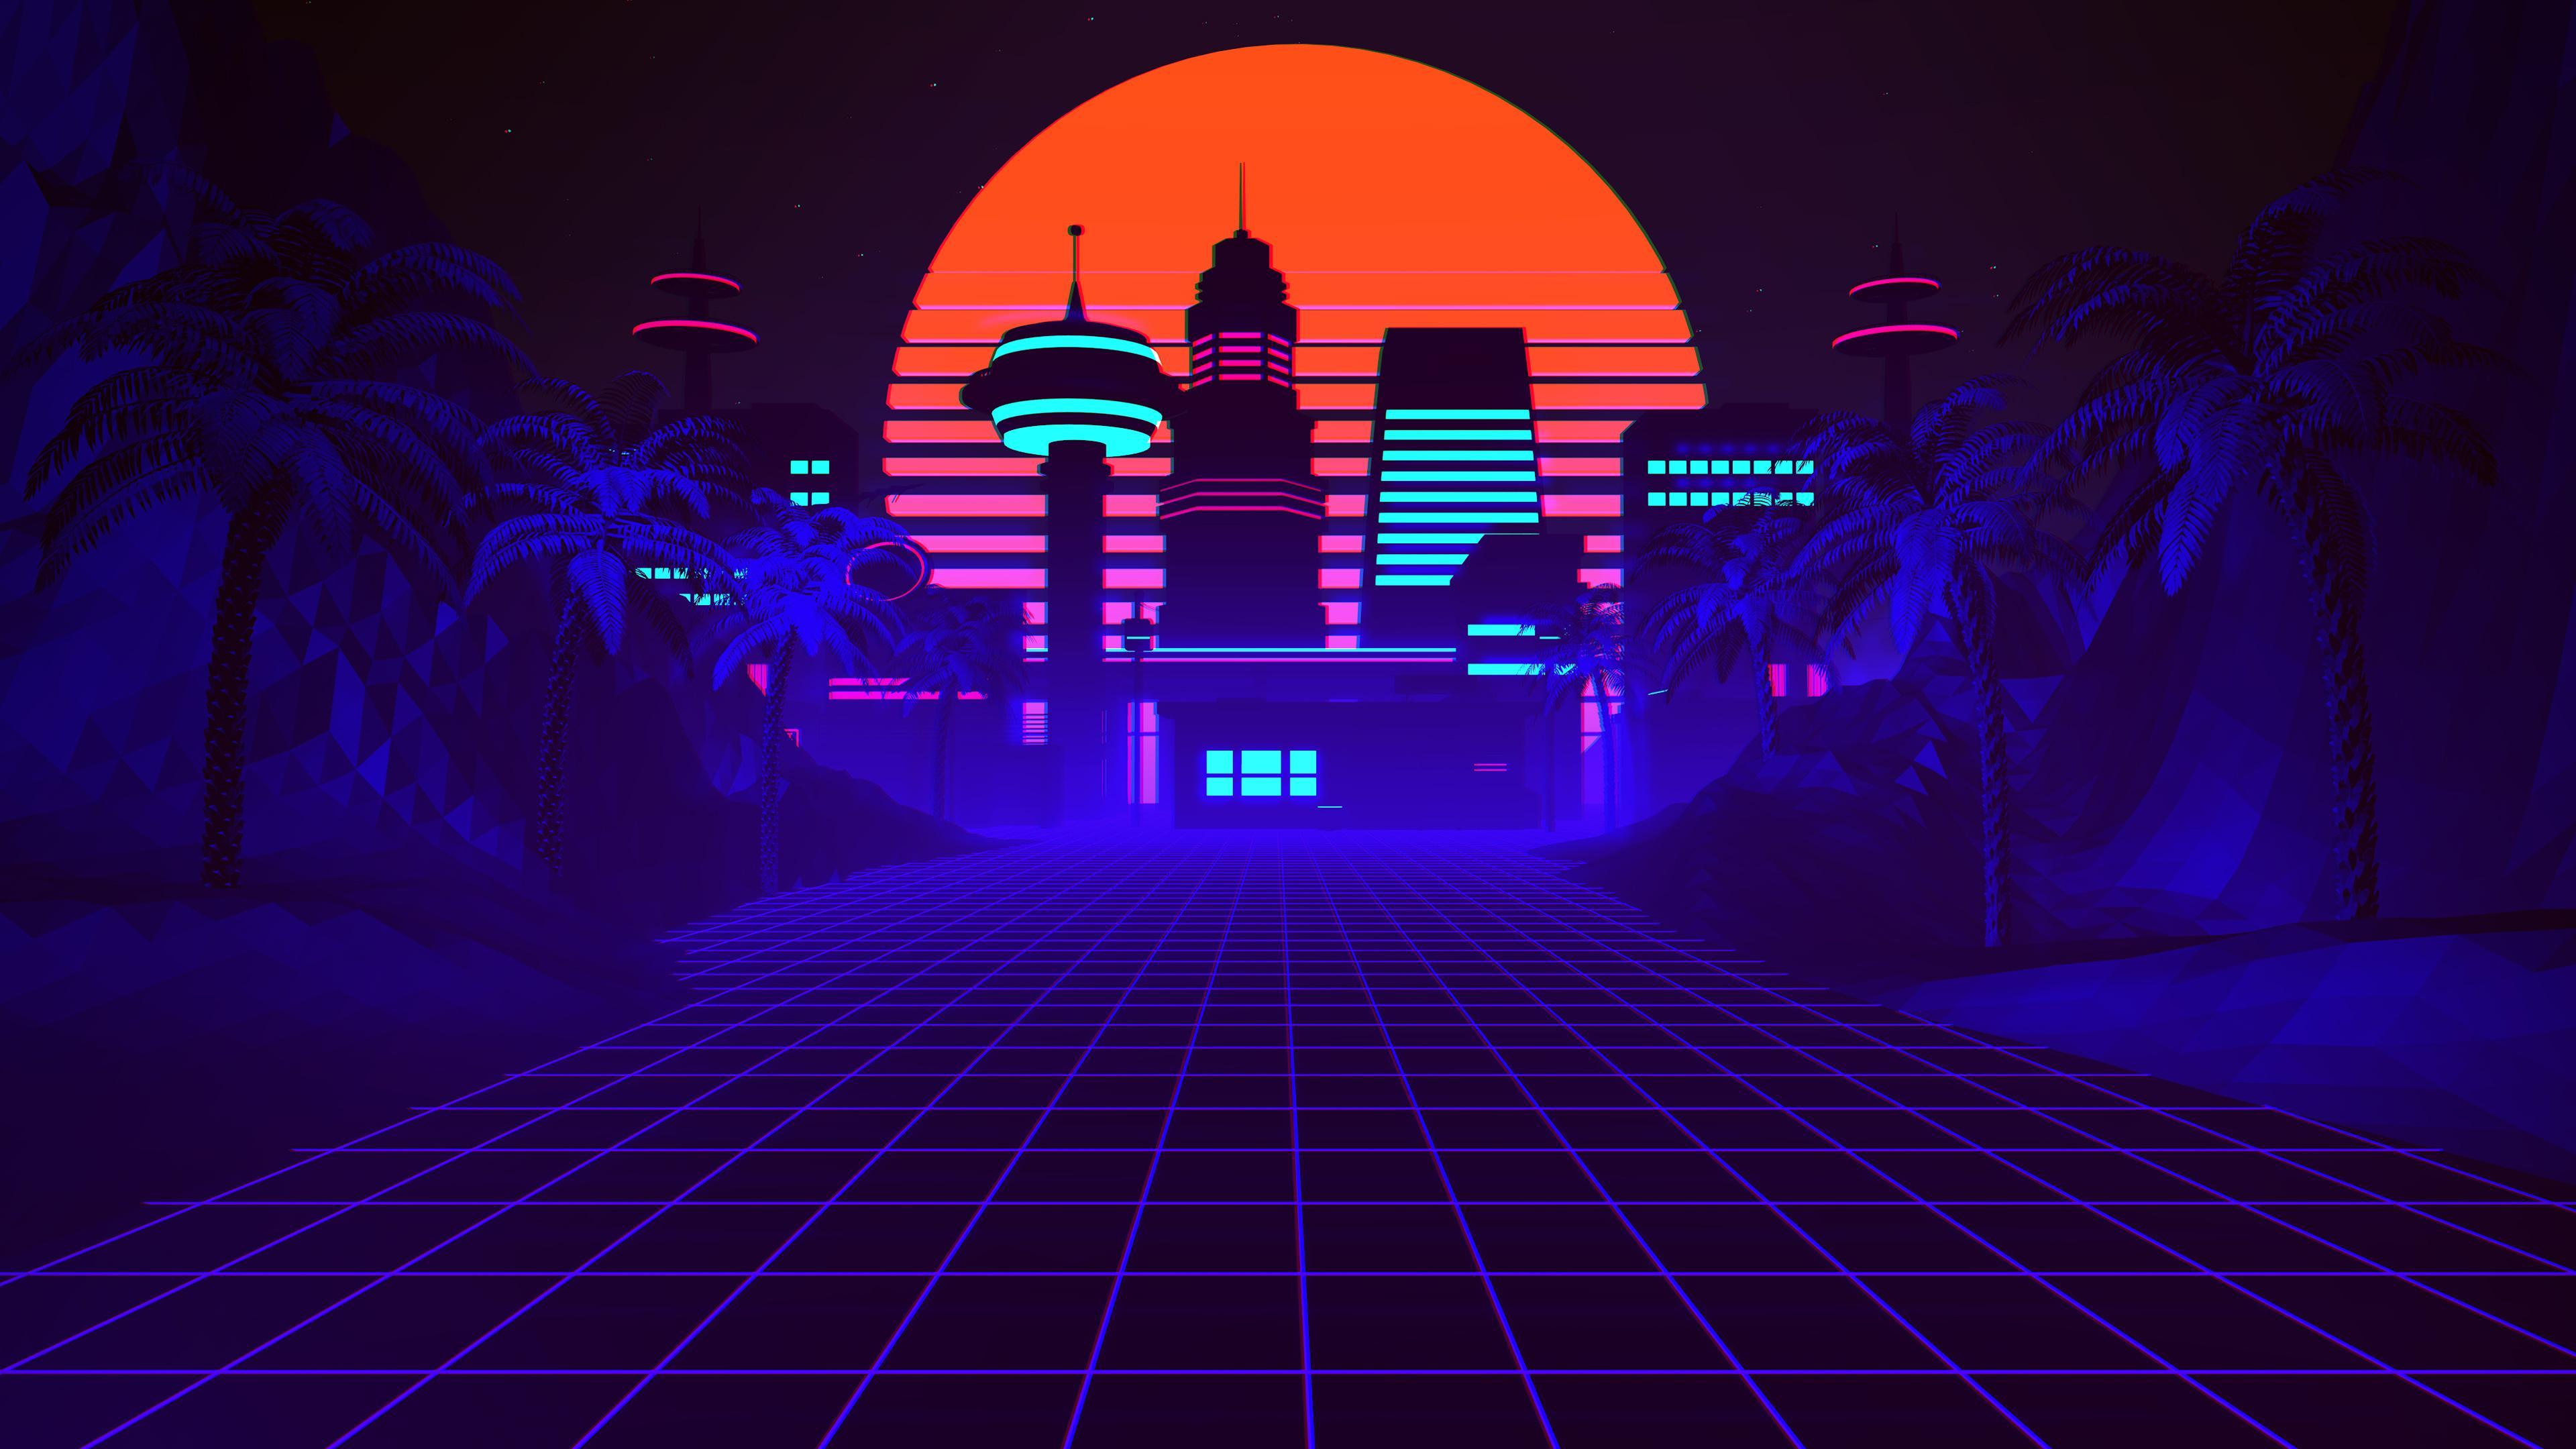 synthwave 4K wallpaper for your desktop or mobile screen free